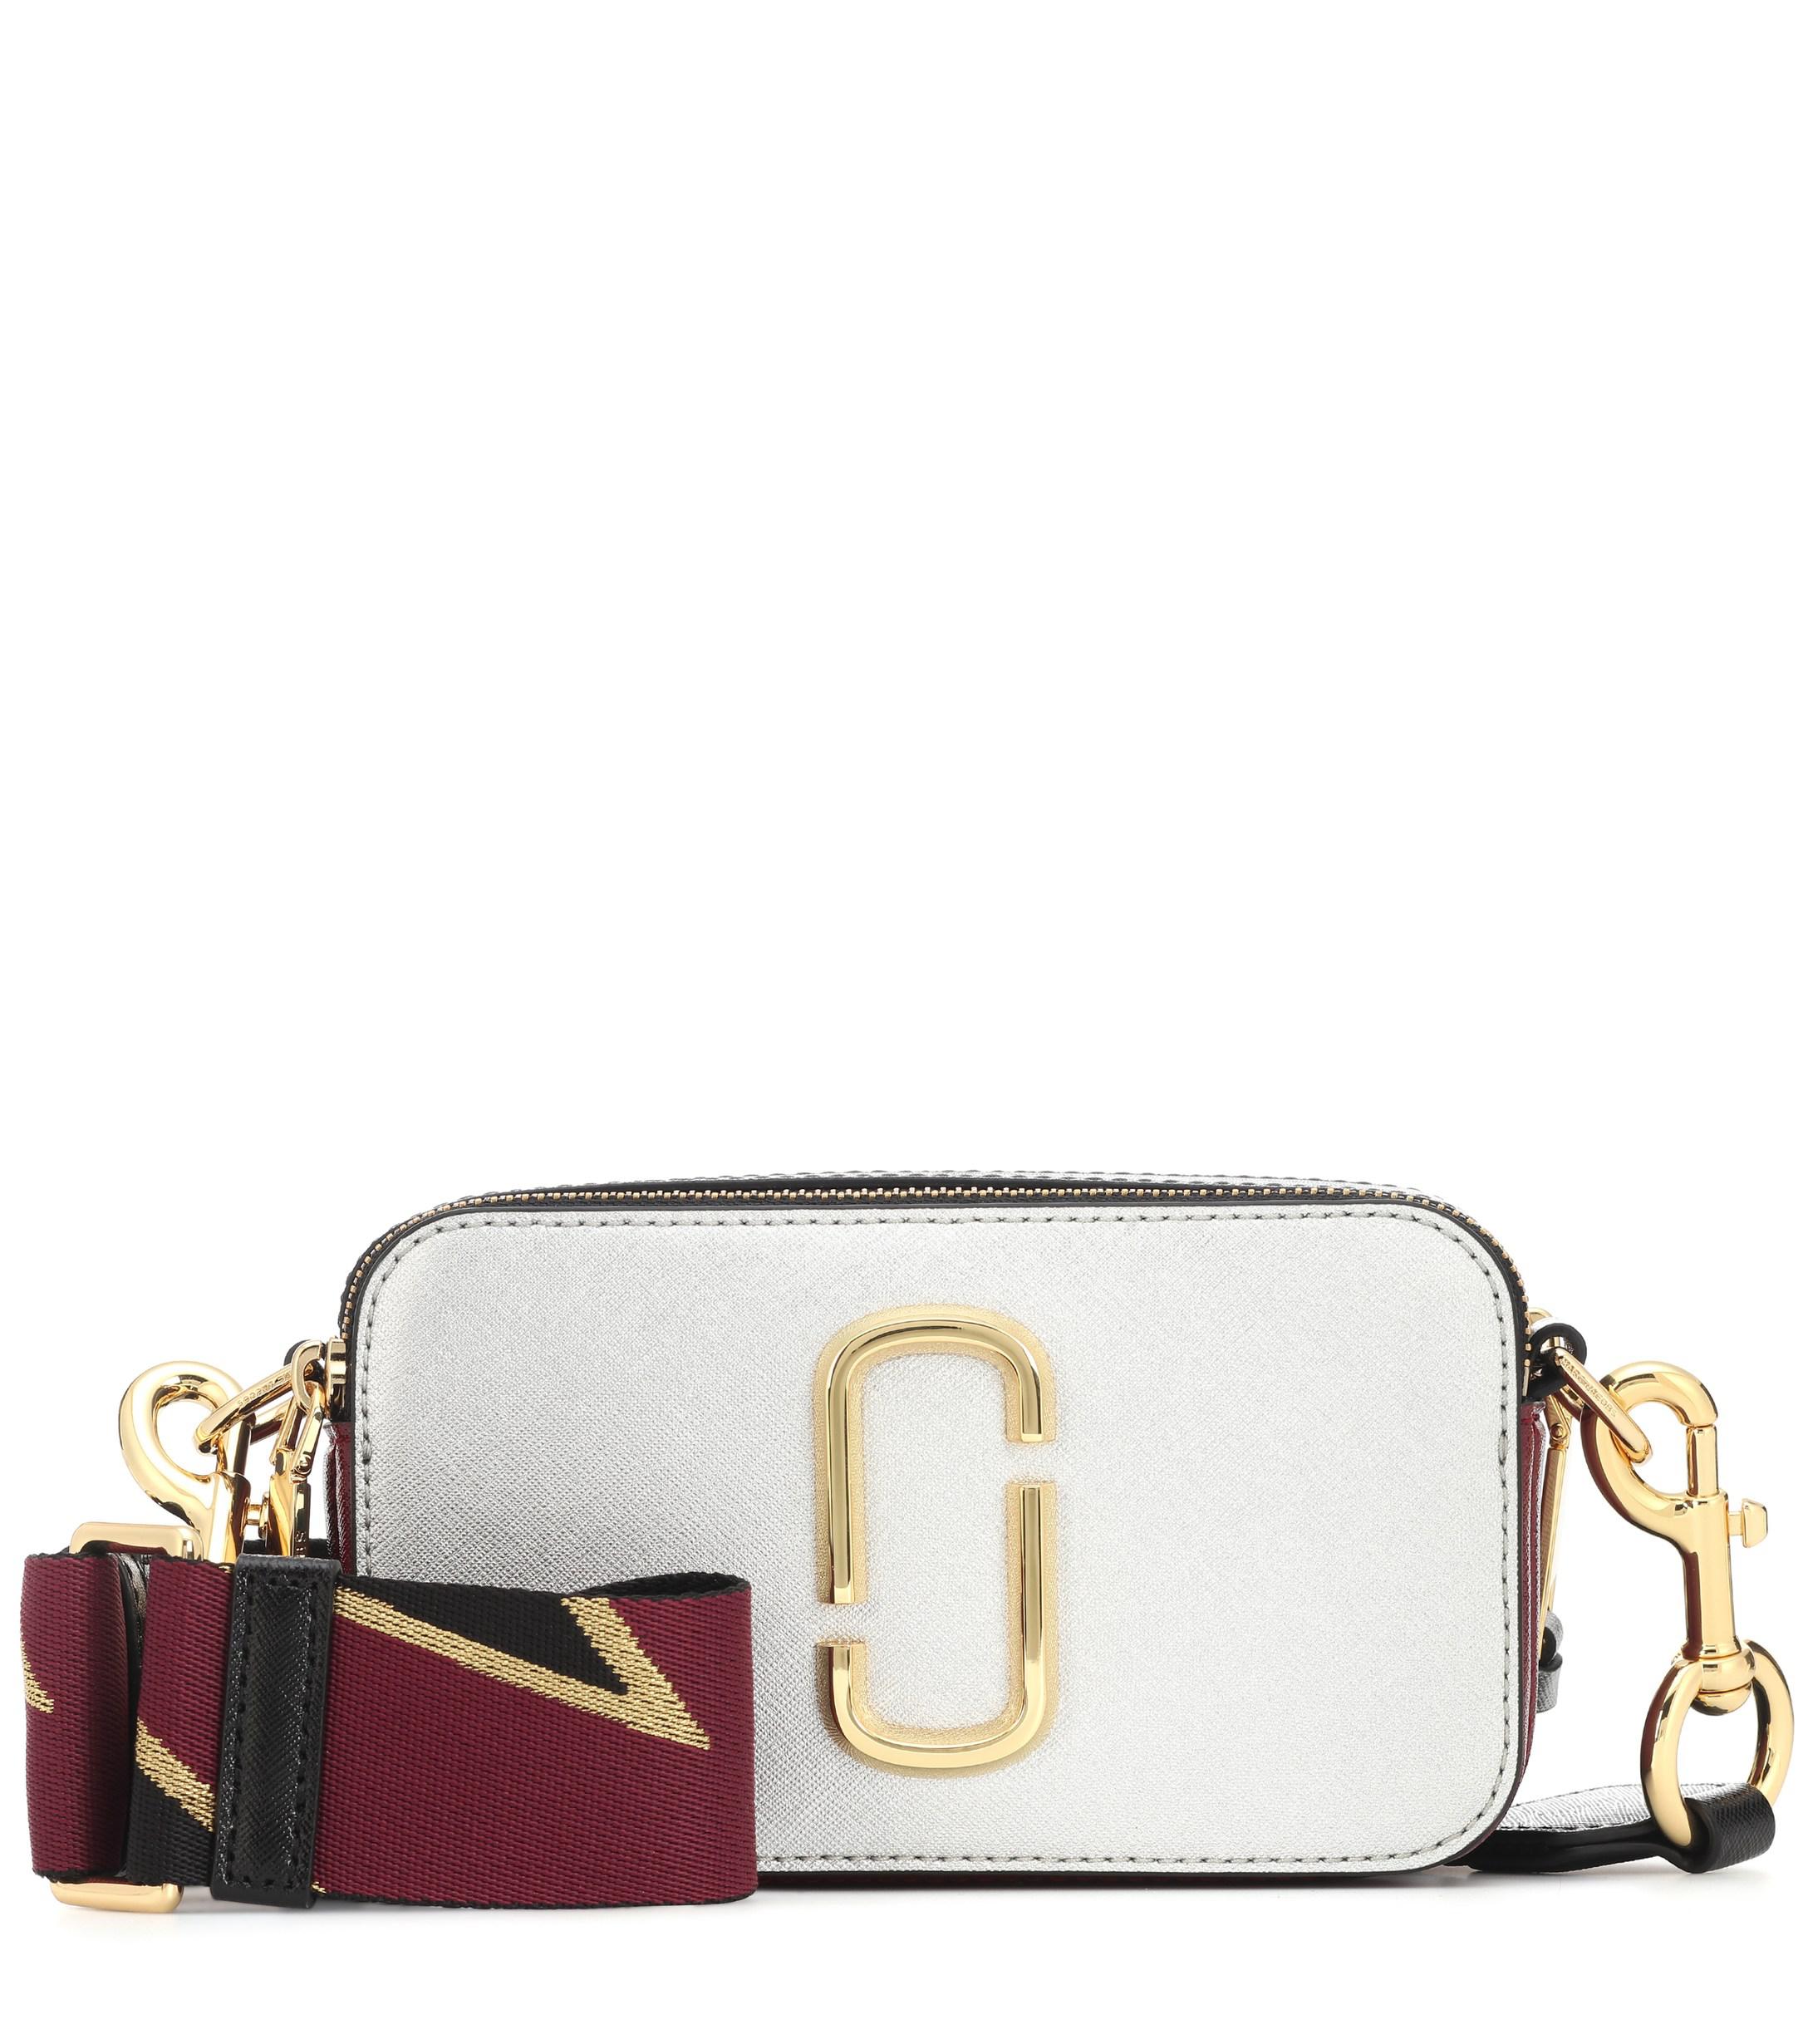 Marc Jacobs Snapshot Small Leather Camera Bag in Metallic - Save 2% - Lyst